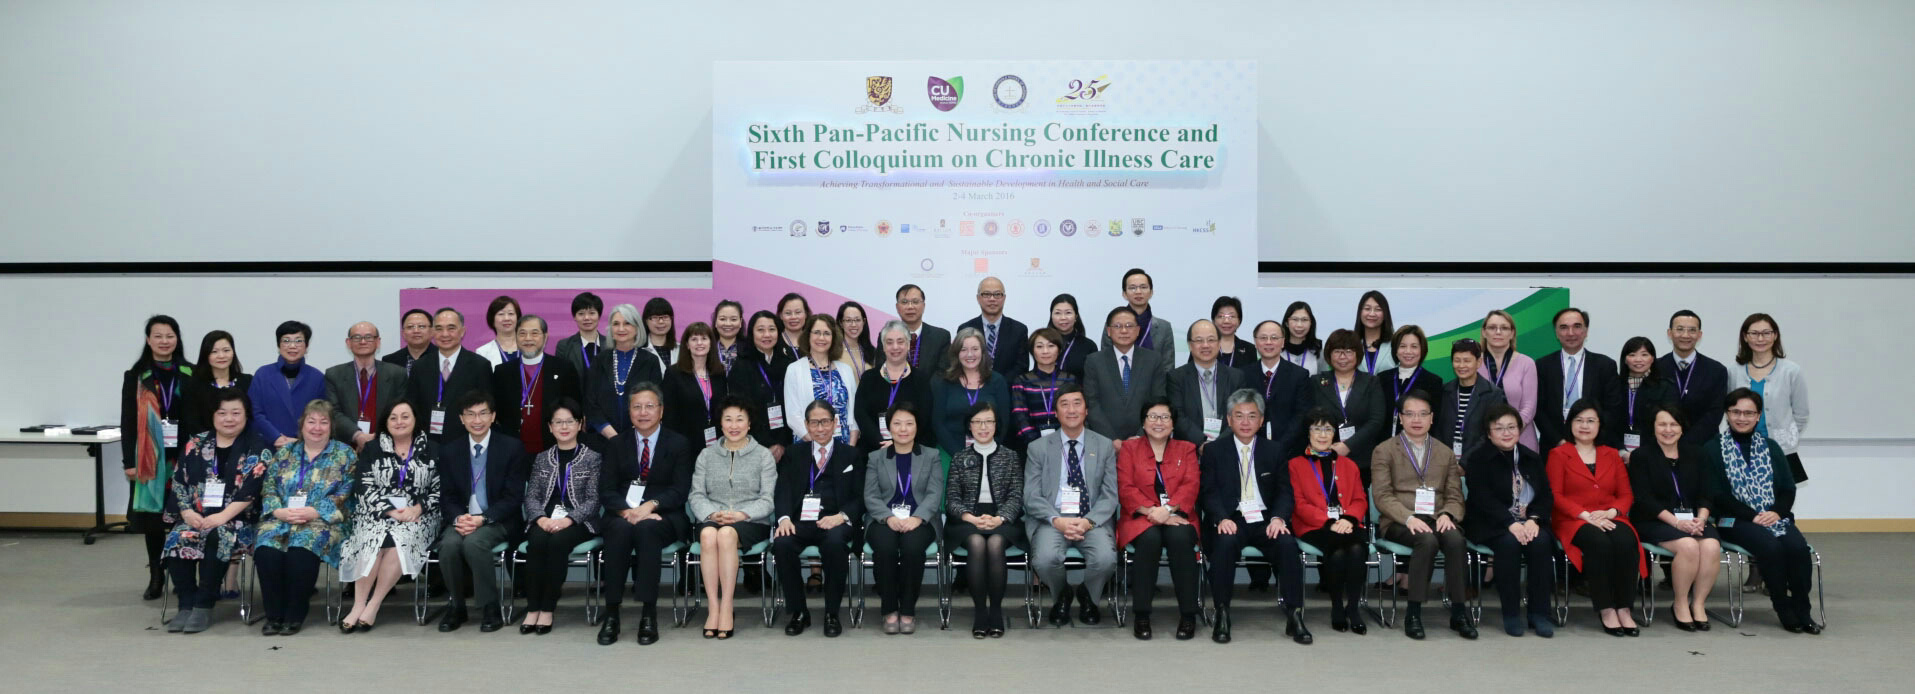 Opening Ceremony of the Sixth Pan-Pacific Nursing Conference